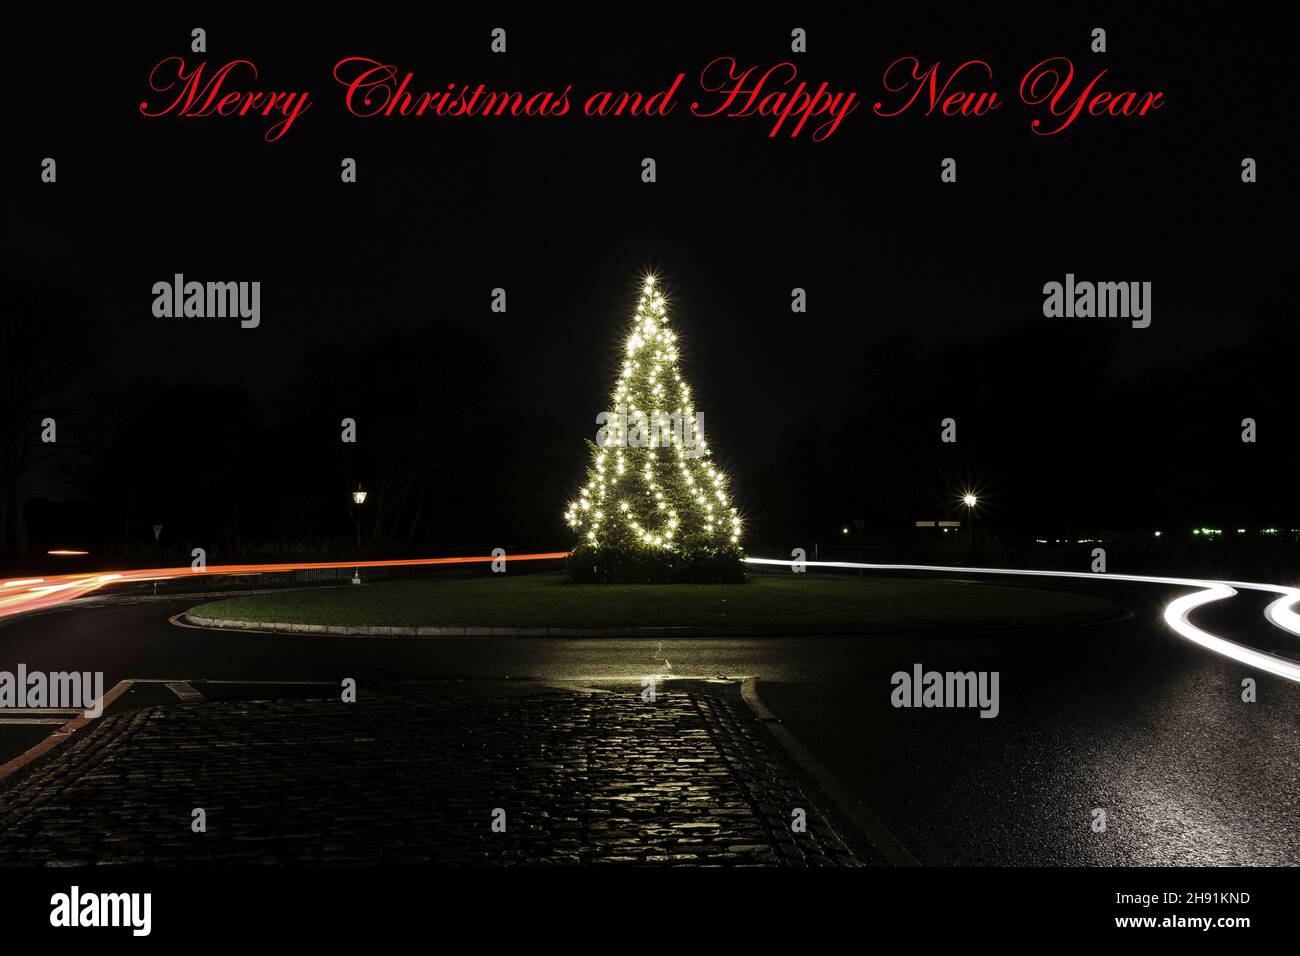 Merry Christmas ans Happy New Year post card, Christmas tree in the Park, Decorated with lights and light trails around Stock Photo